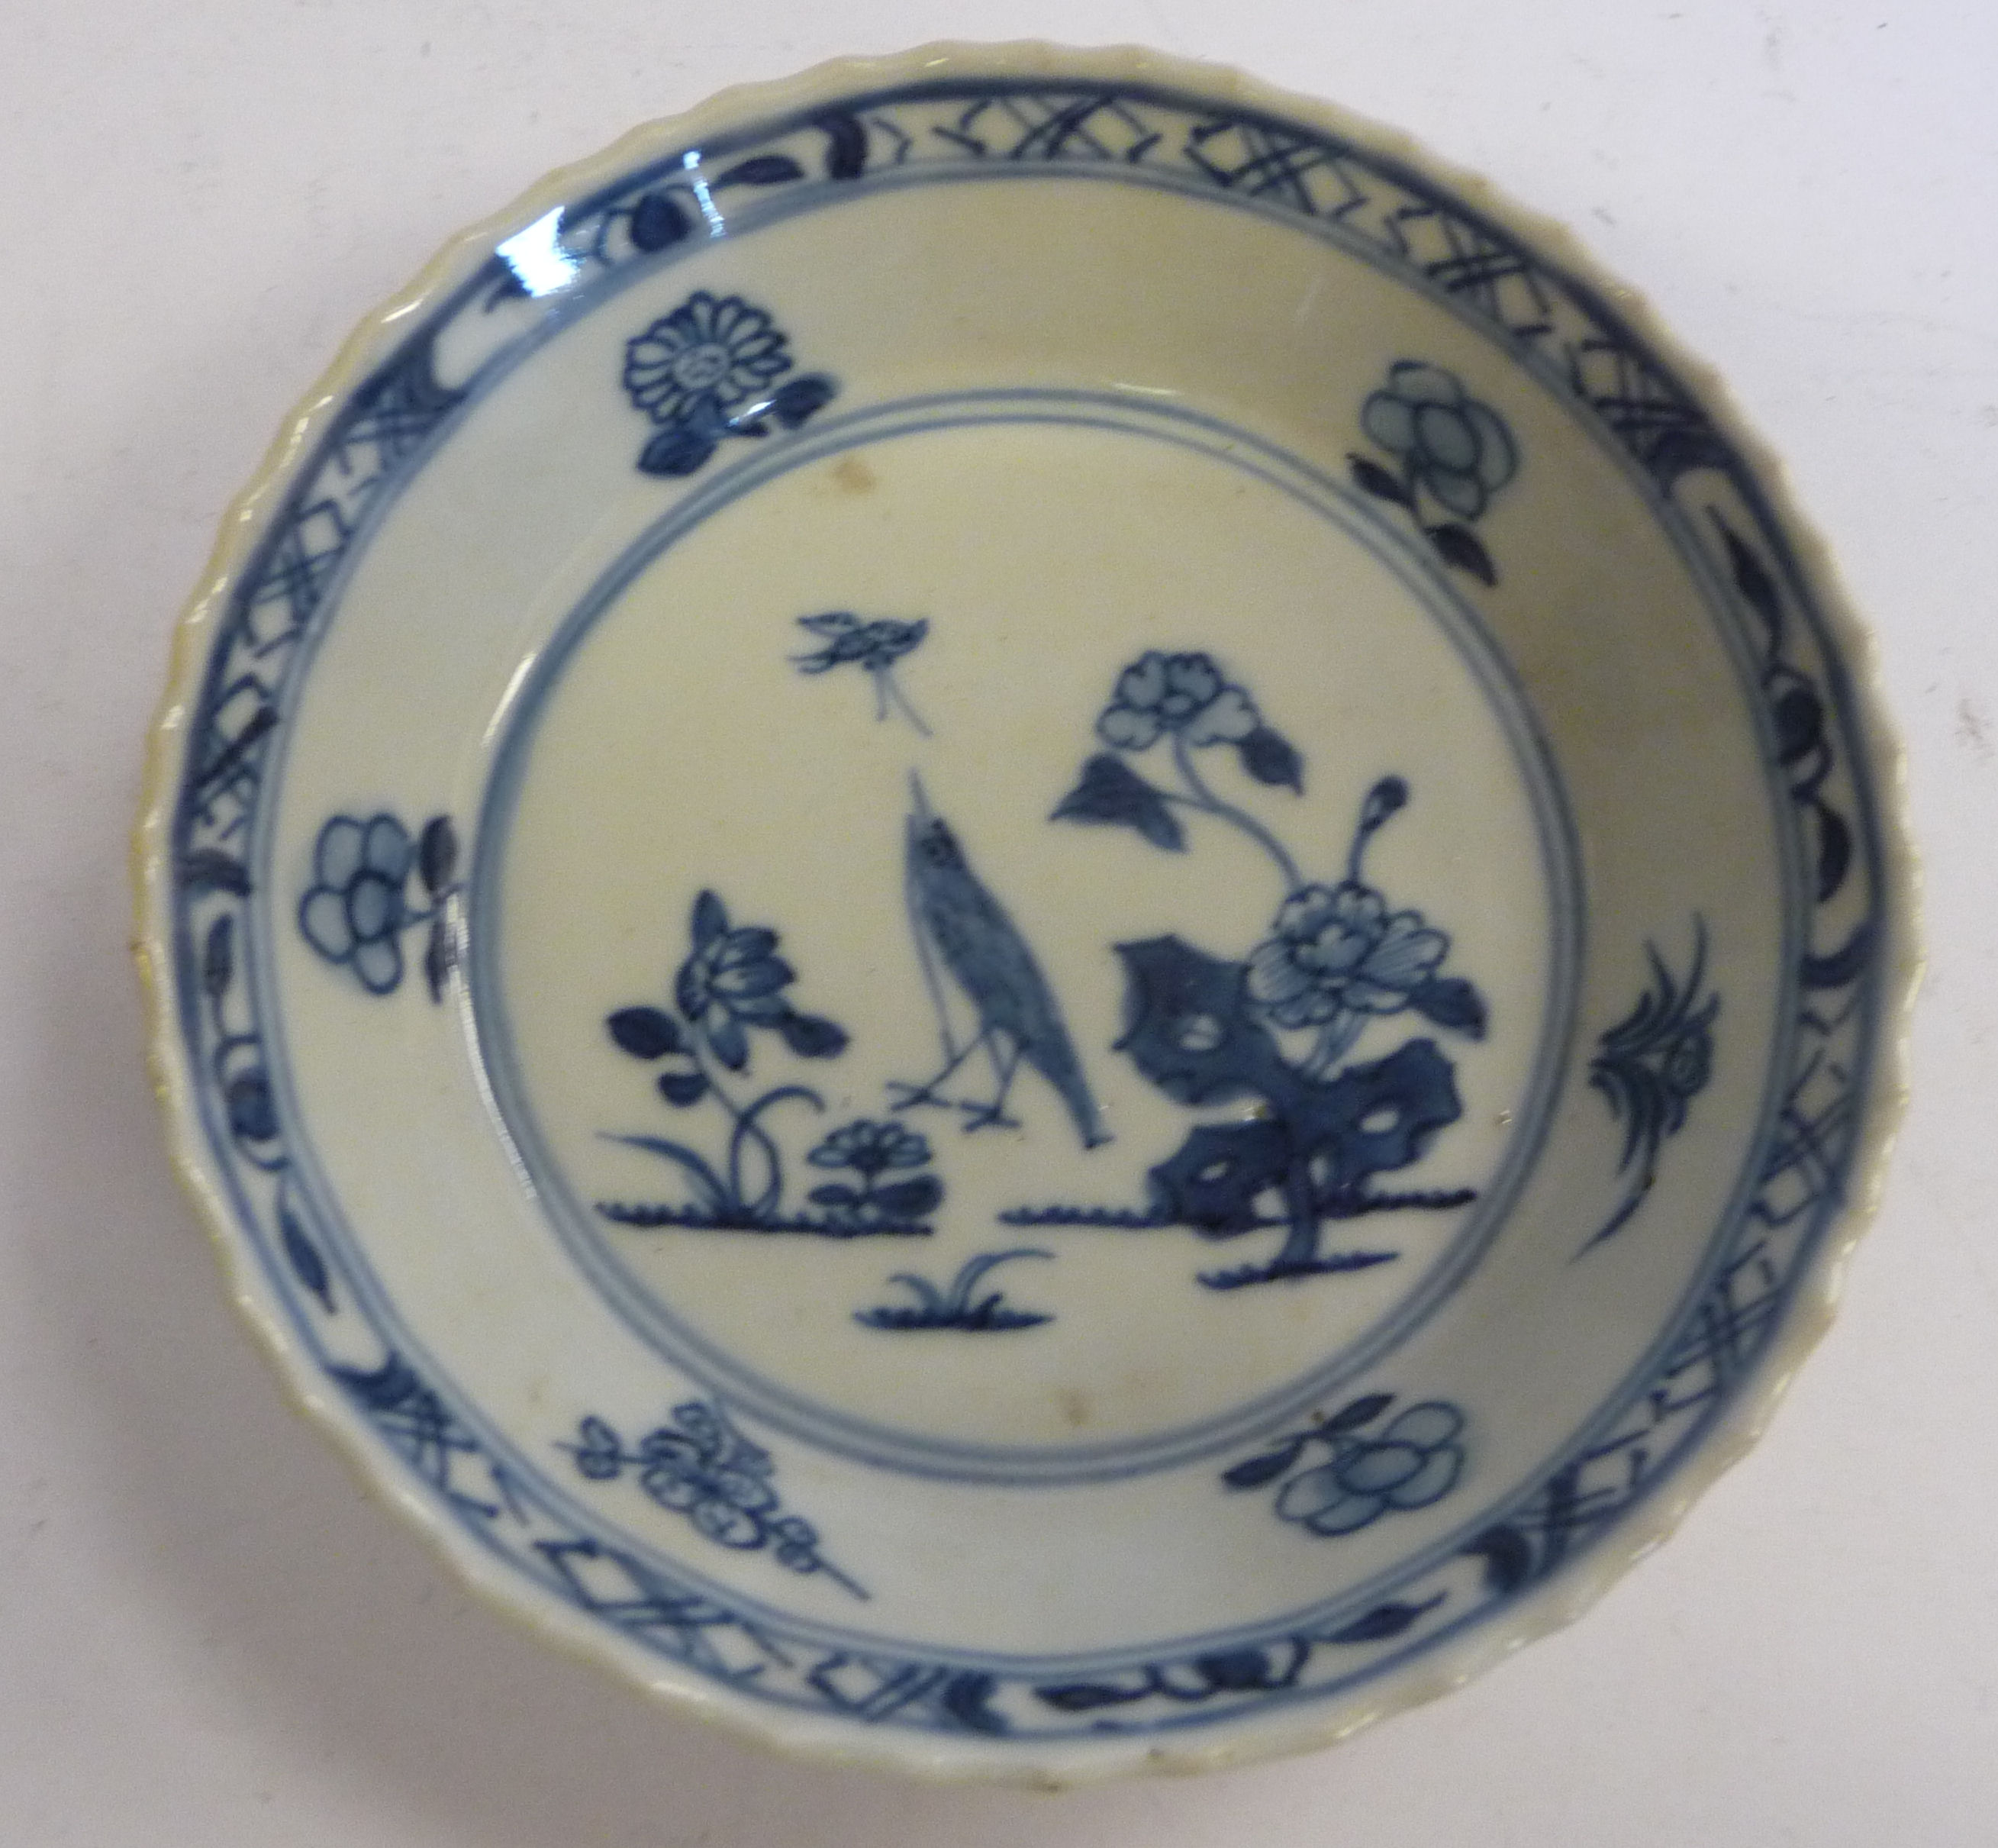 A mid 18thC Chinese porcelain footed dish with angled sides, decorated with a bird,